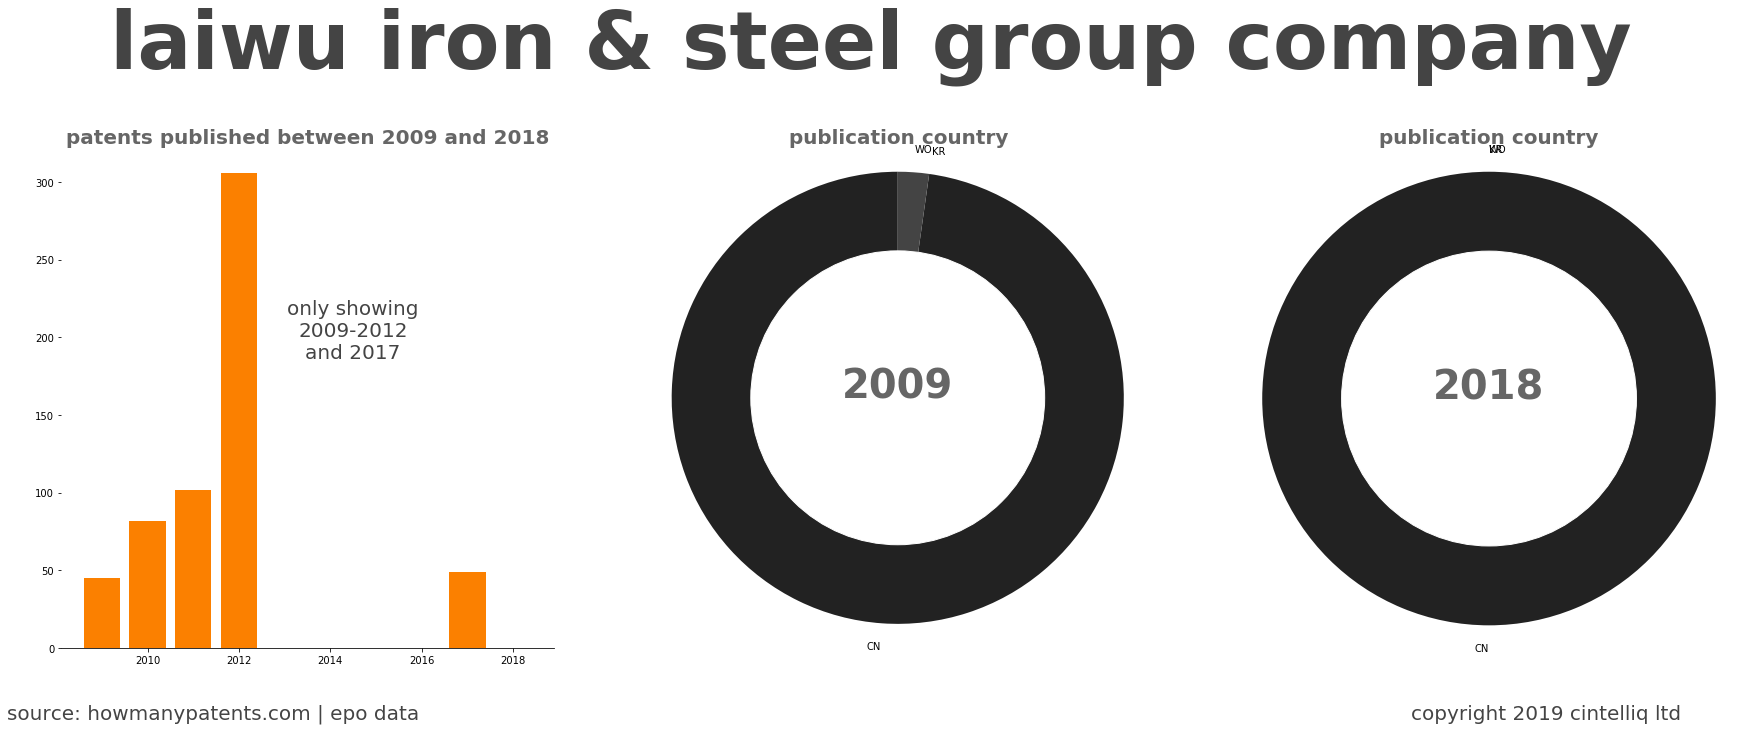 summary of patents for Laiwu Iron & Steel Group Company